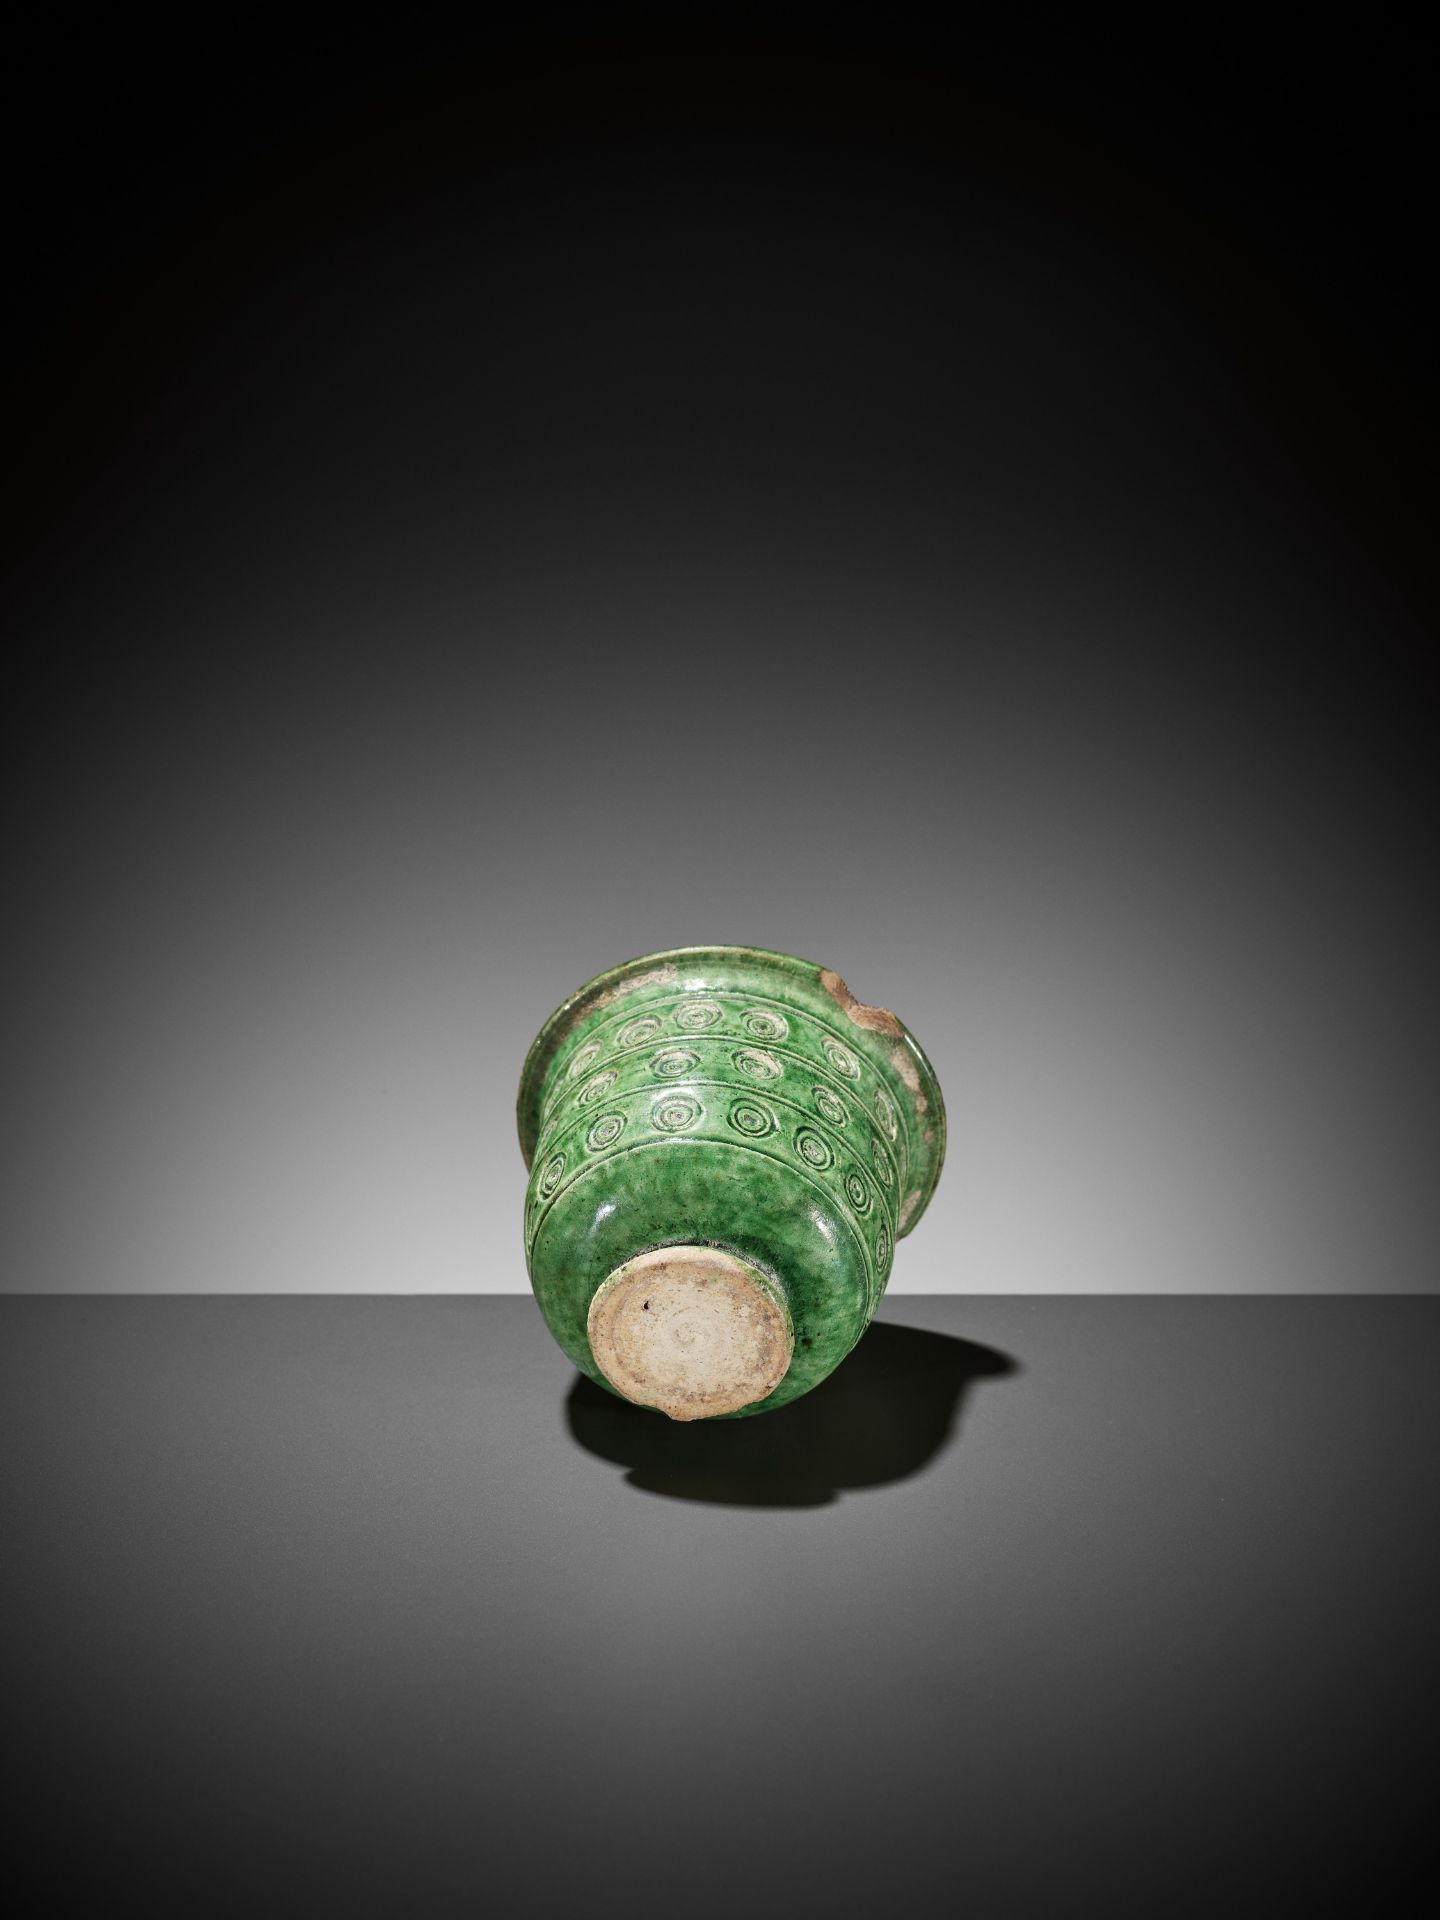 A RARE GREEN-GLAZED BELL-SHAPED CUP, TANG DYNASTY - Image 8 of 8